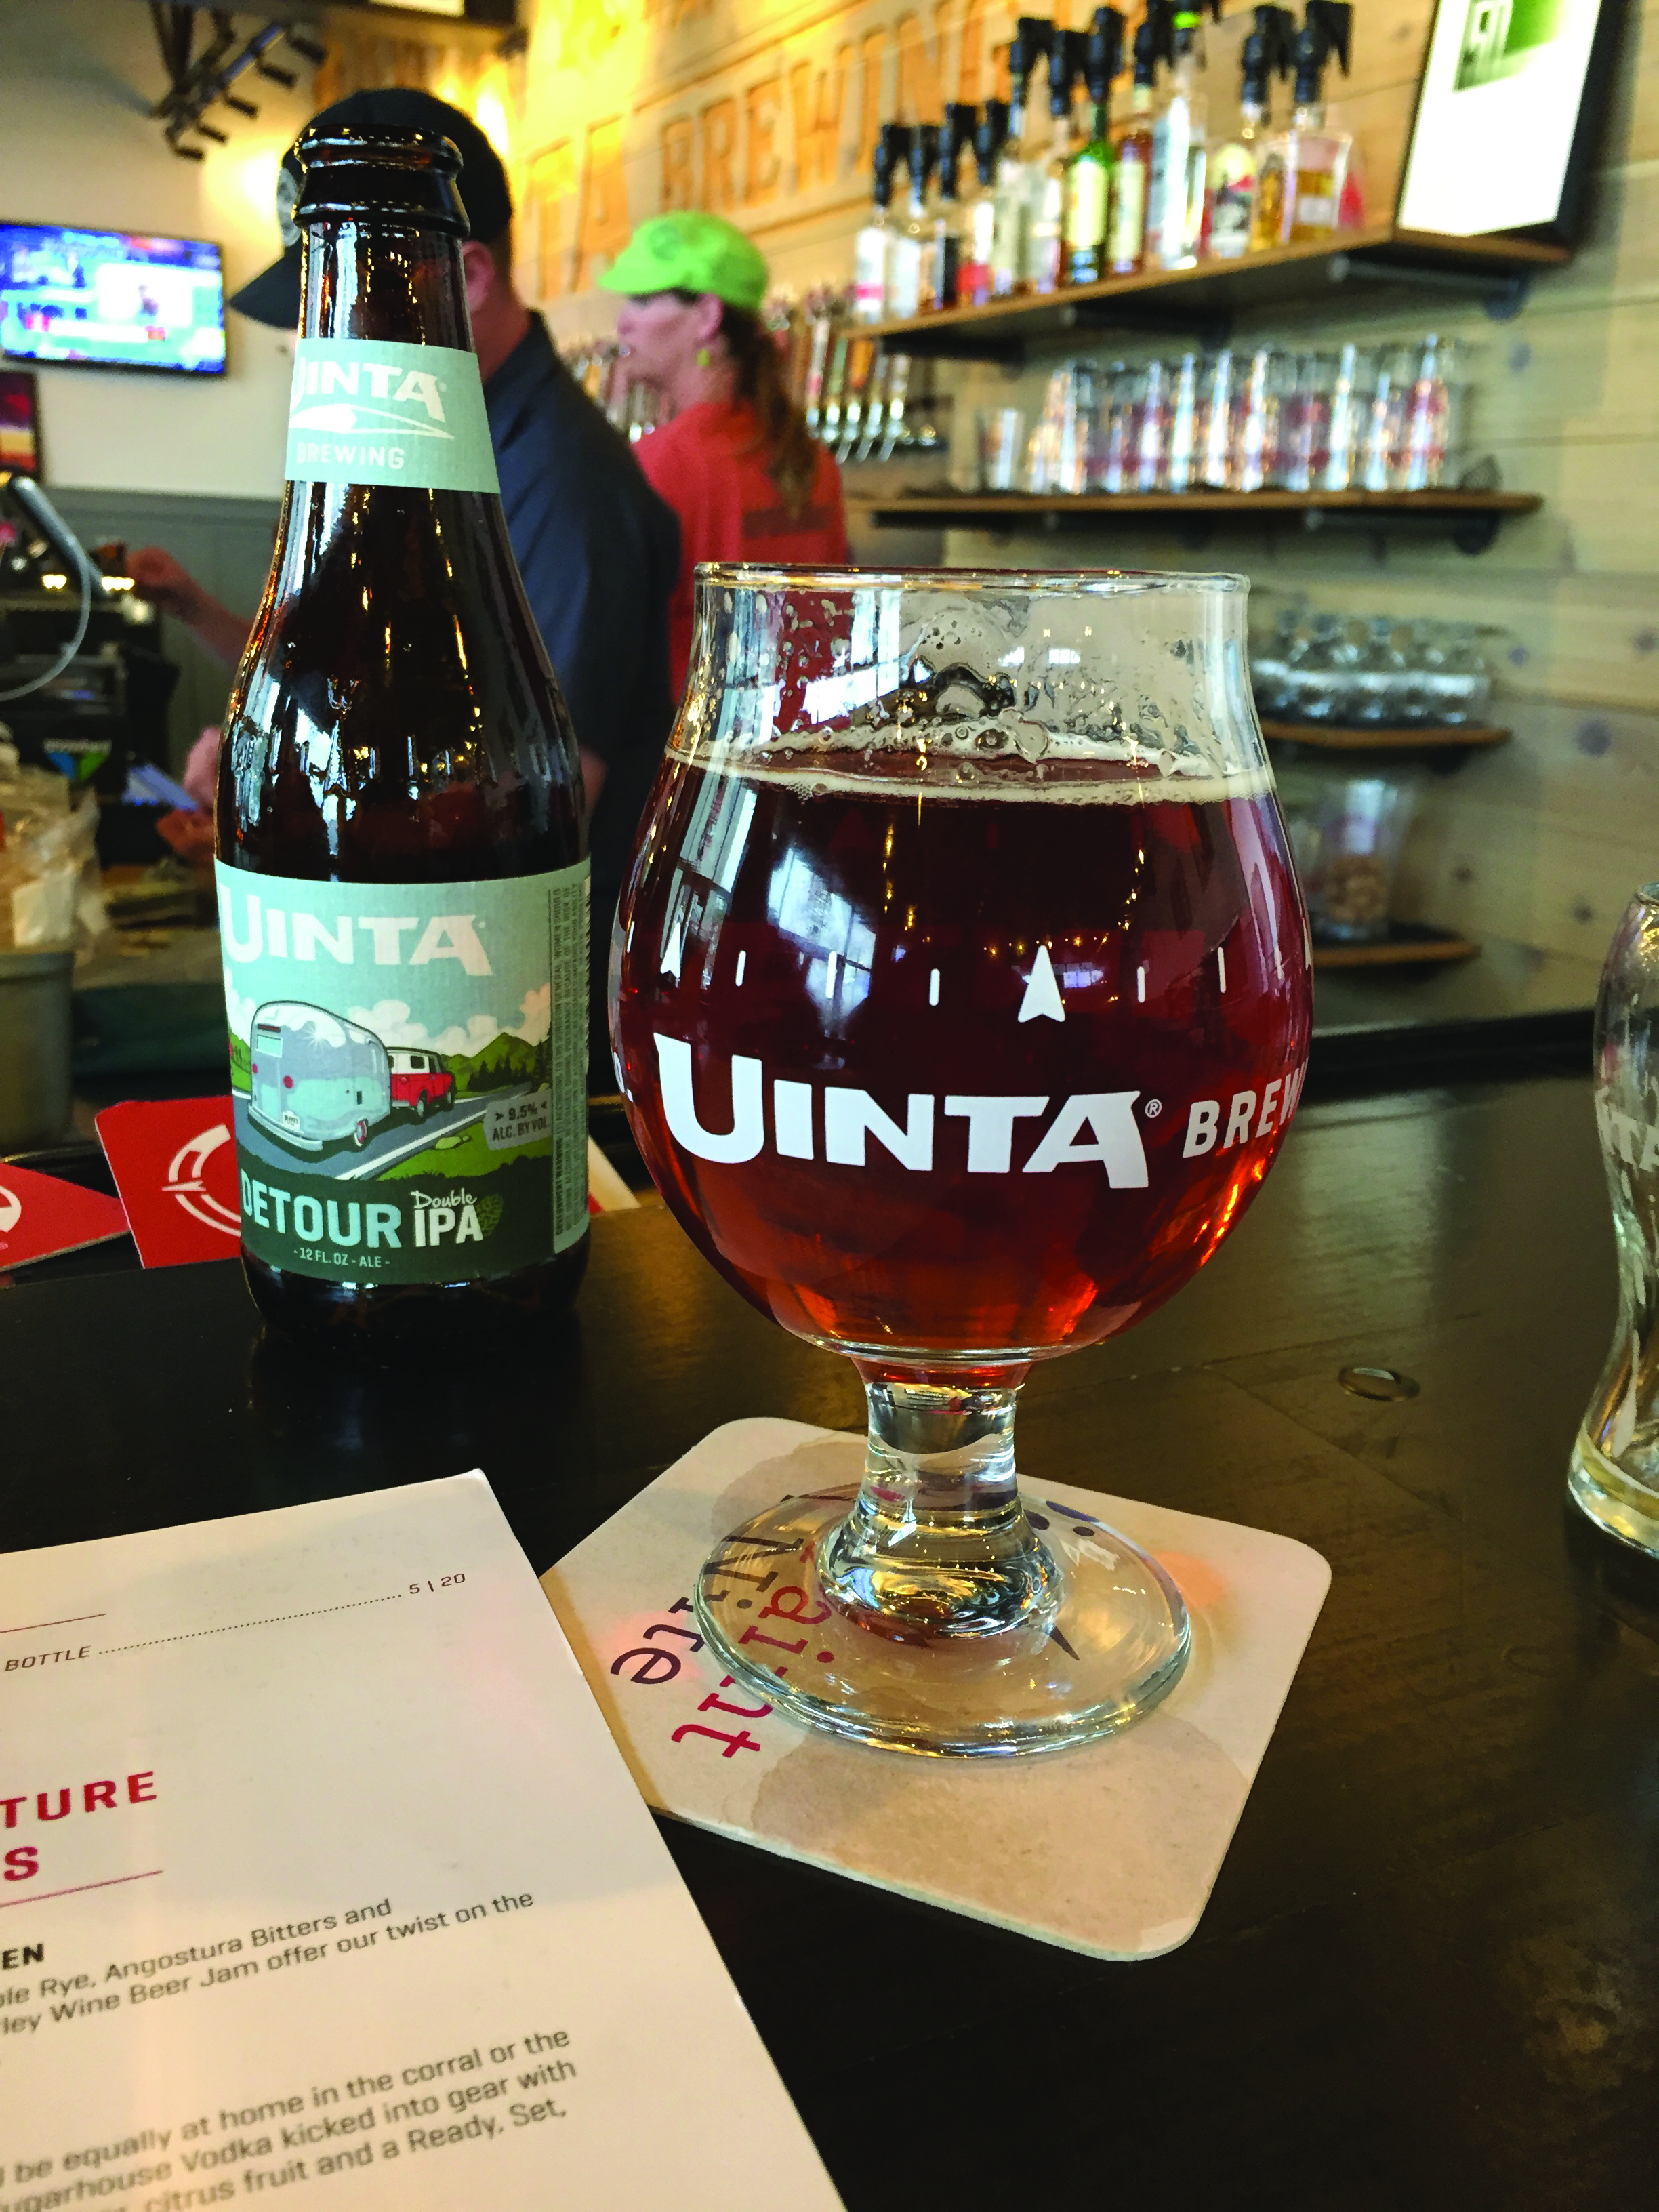   A Detour IPA is poured at Uinta Brewing Co. in Salt Lake City. Photo Neill Pieper  